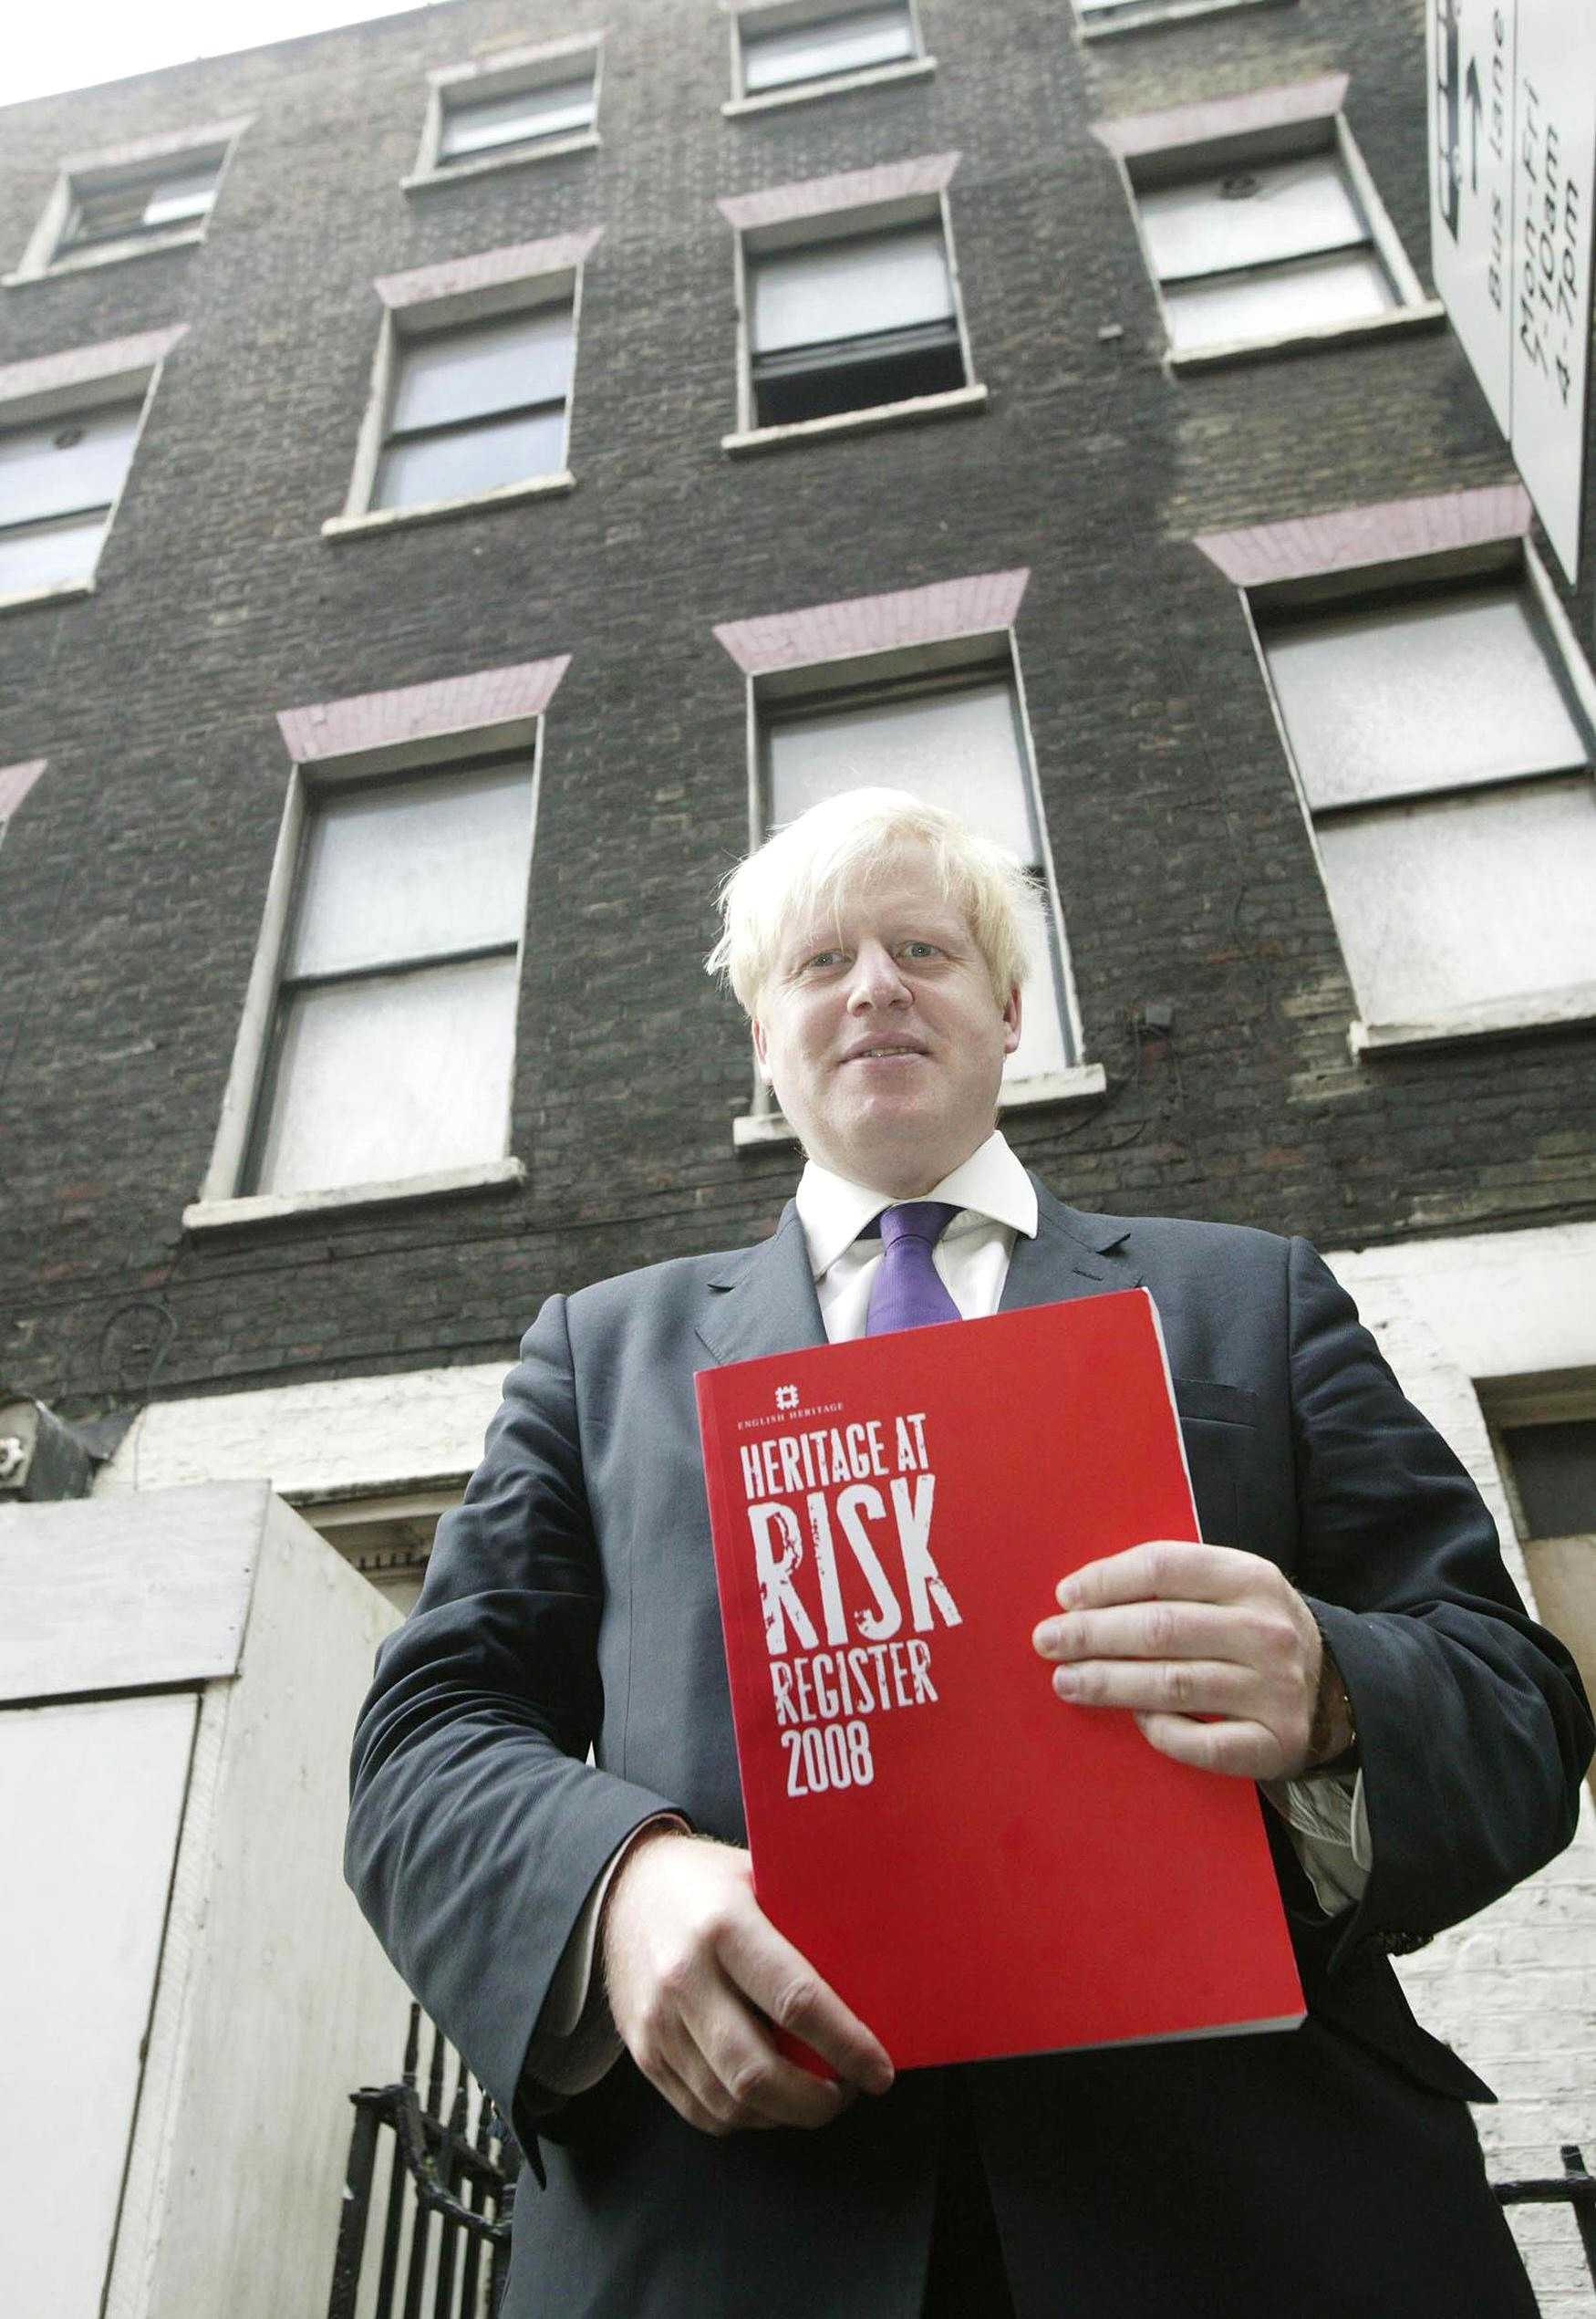 London Mayor Boris Johnson, with the Heritage At Risk Register outside 65 Swinton St, London, WC1, a grade ll listed building on the Heritage At Risk register.